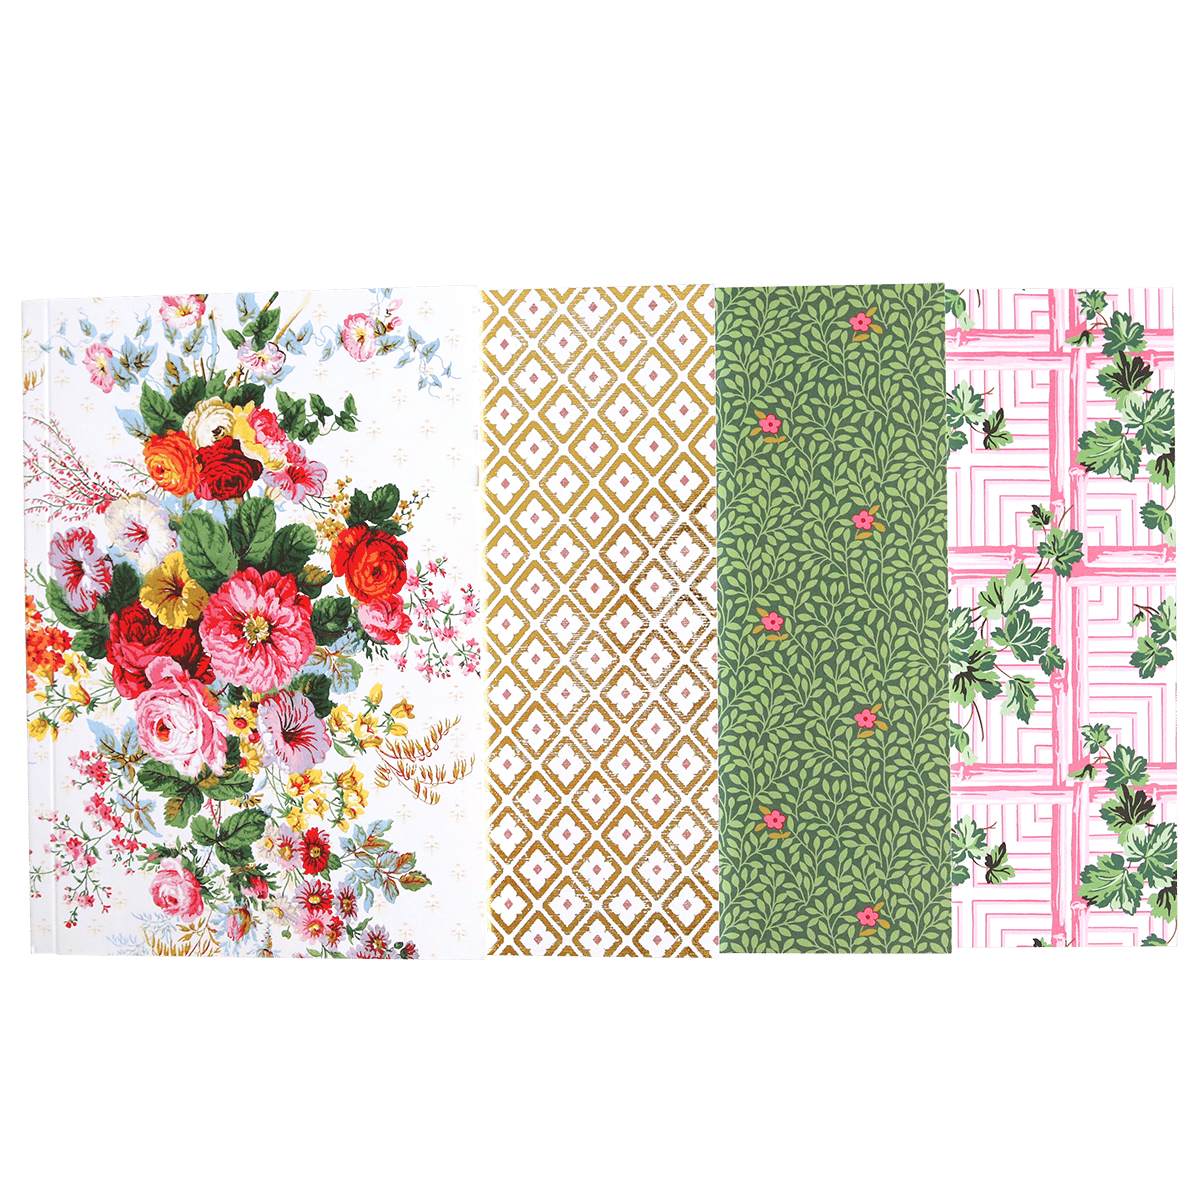 four different patterns of flowers on a green background.